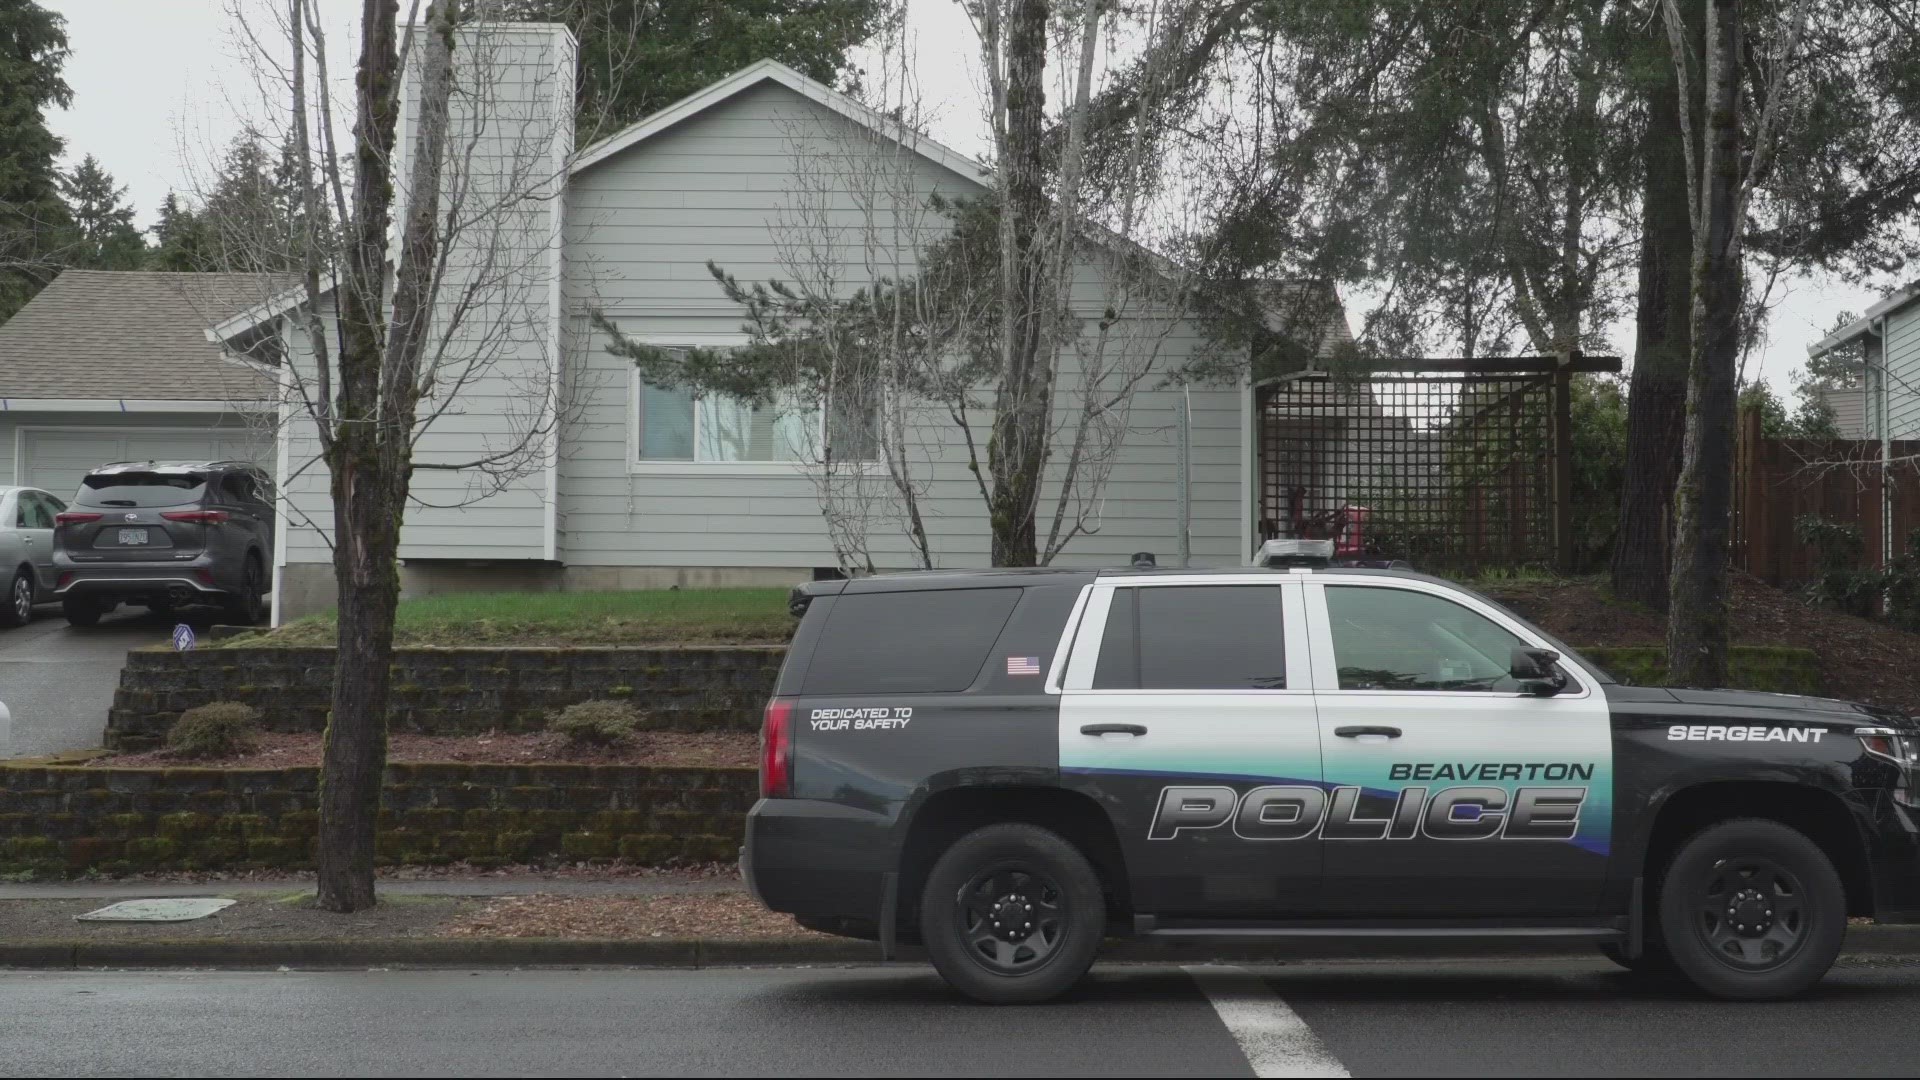 A toddler in Beaverton was hospitalized Monday due to a suspected fentanyl overdose, according to Beaverton police